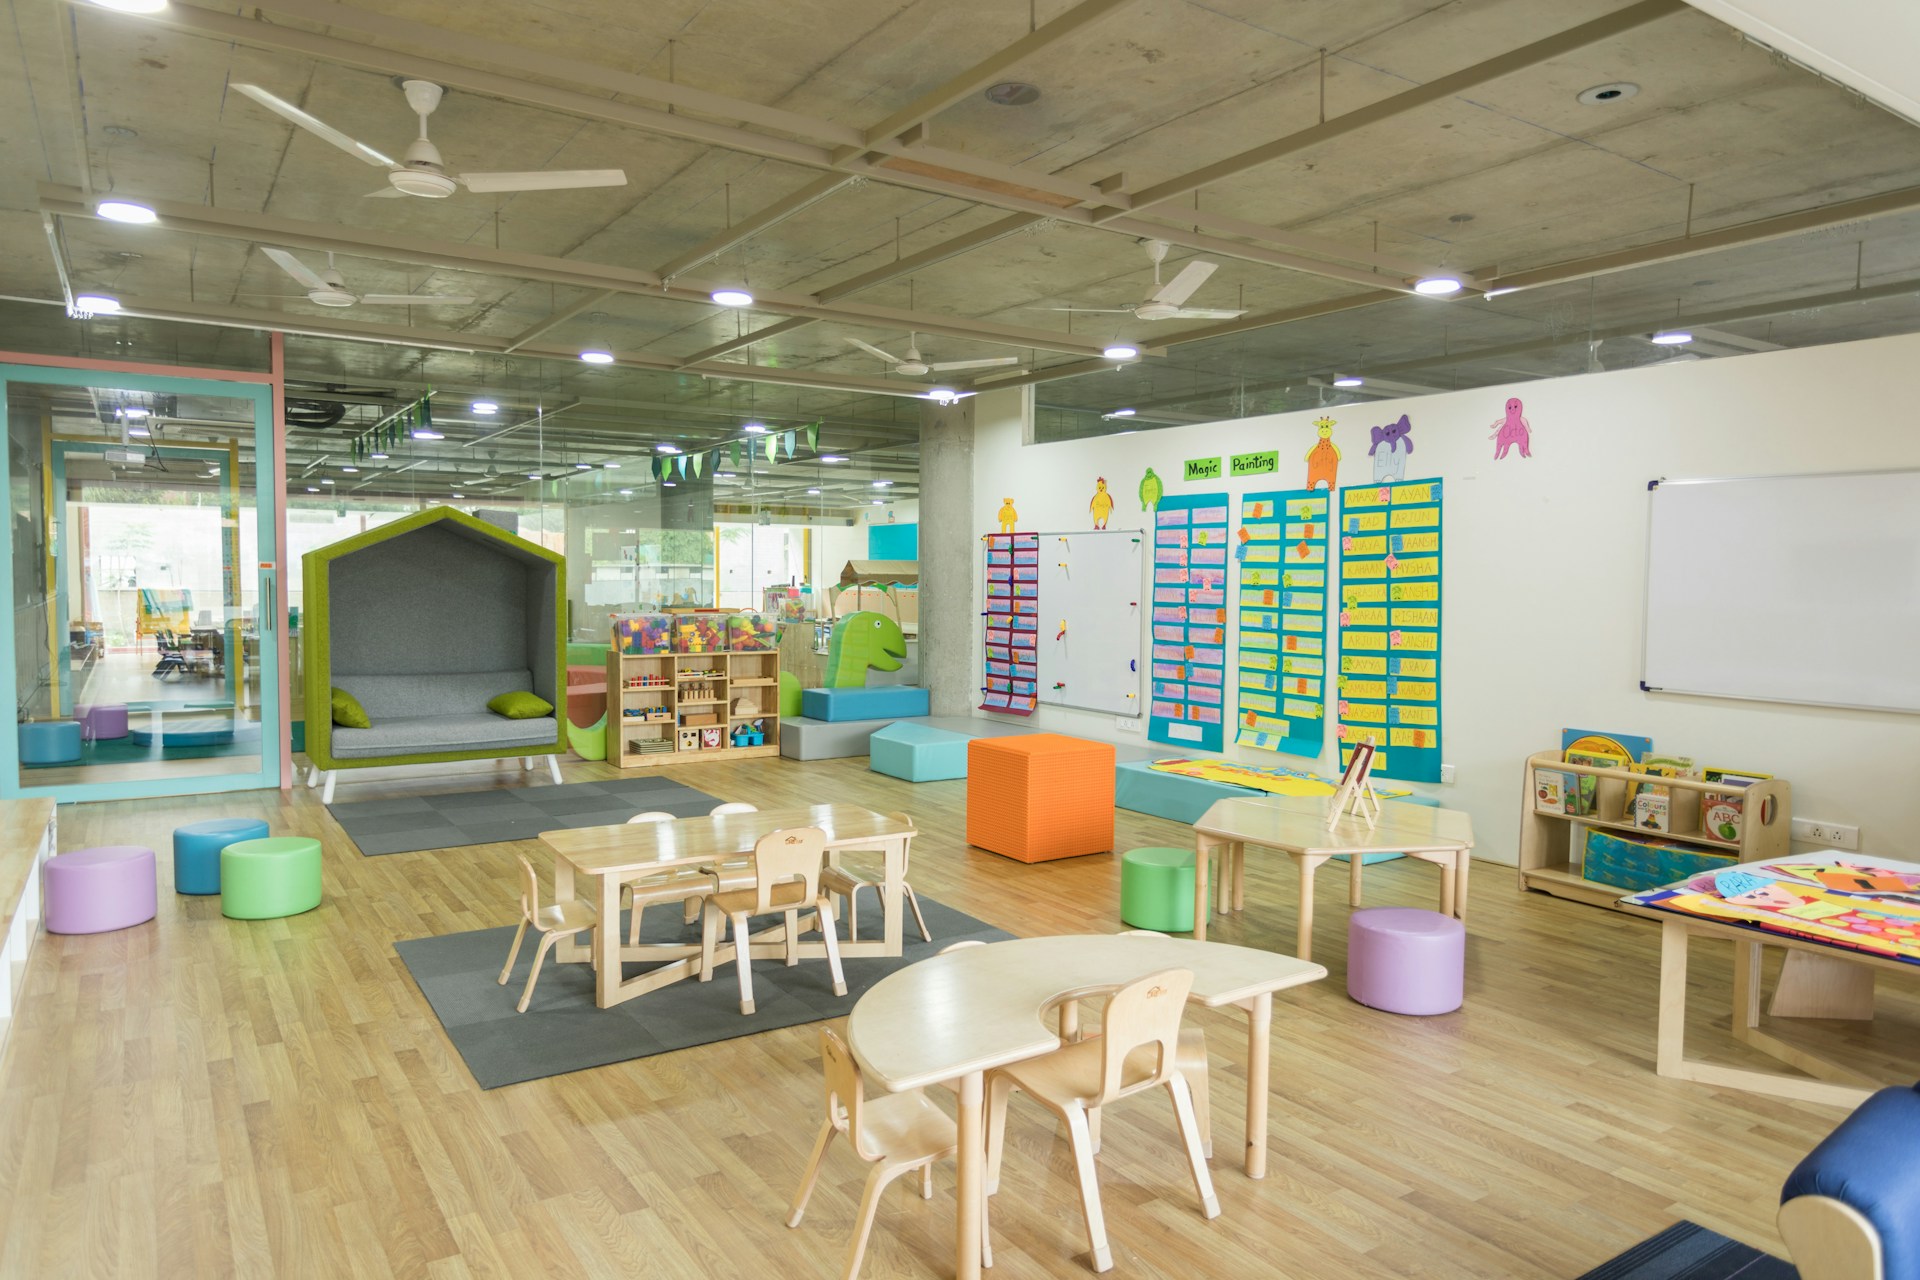 Green Beginnings By Starting an Eco-Friendly and Sustainable Daycare